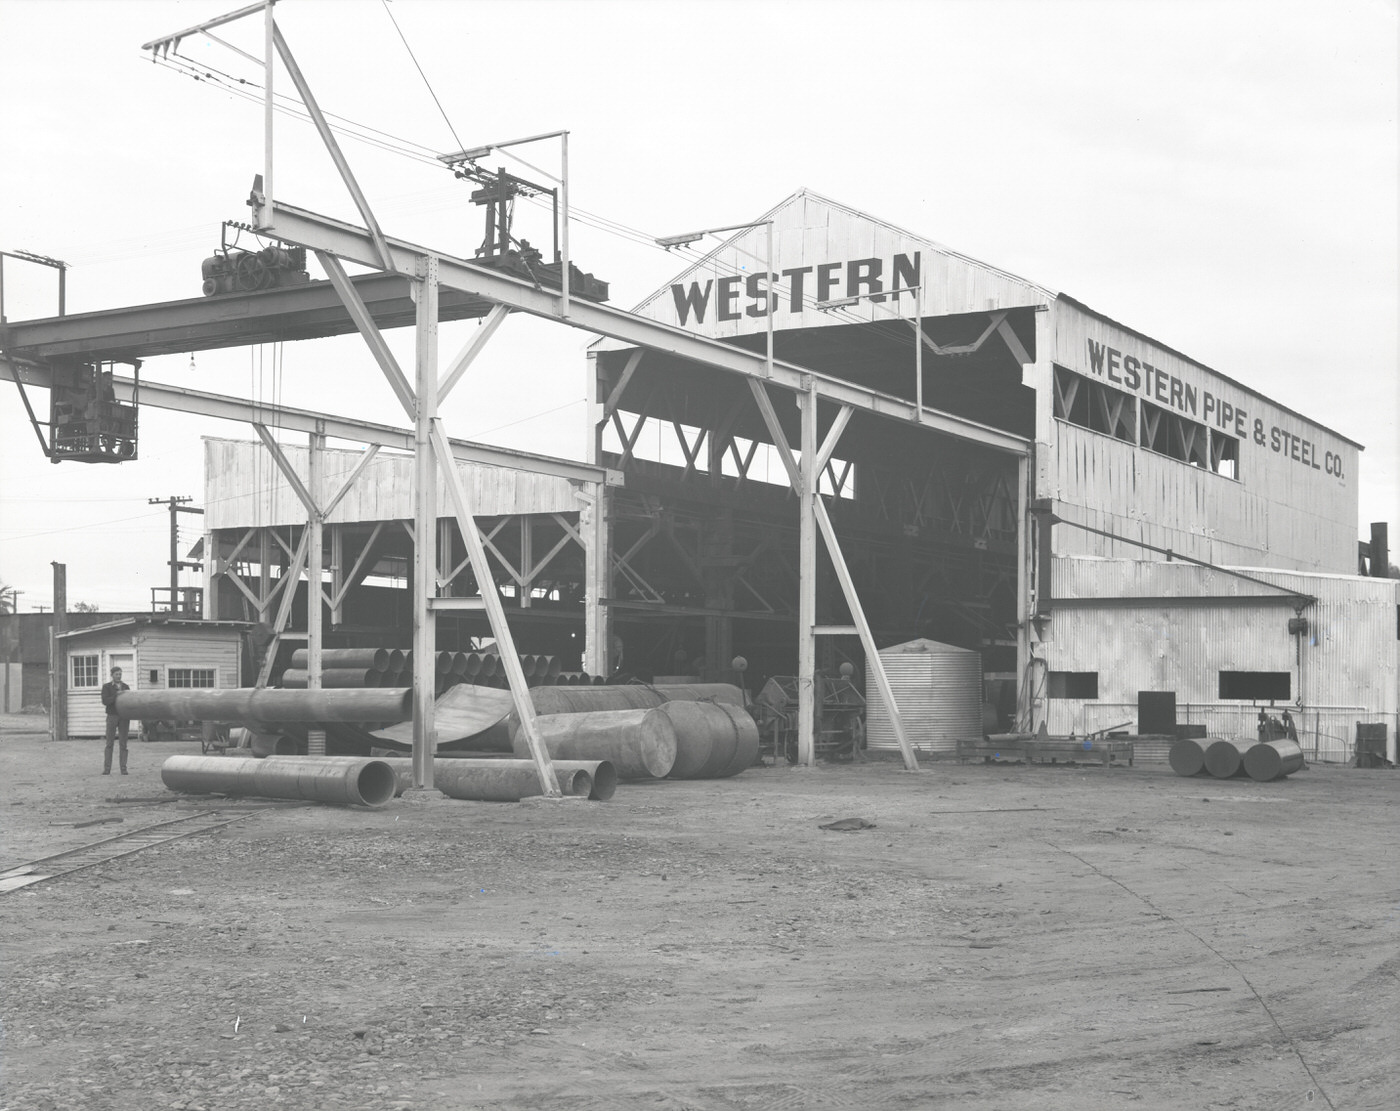 Western Pipe & Steel Co. Facility Exterior, 1943